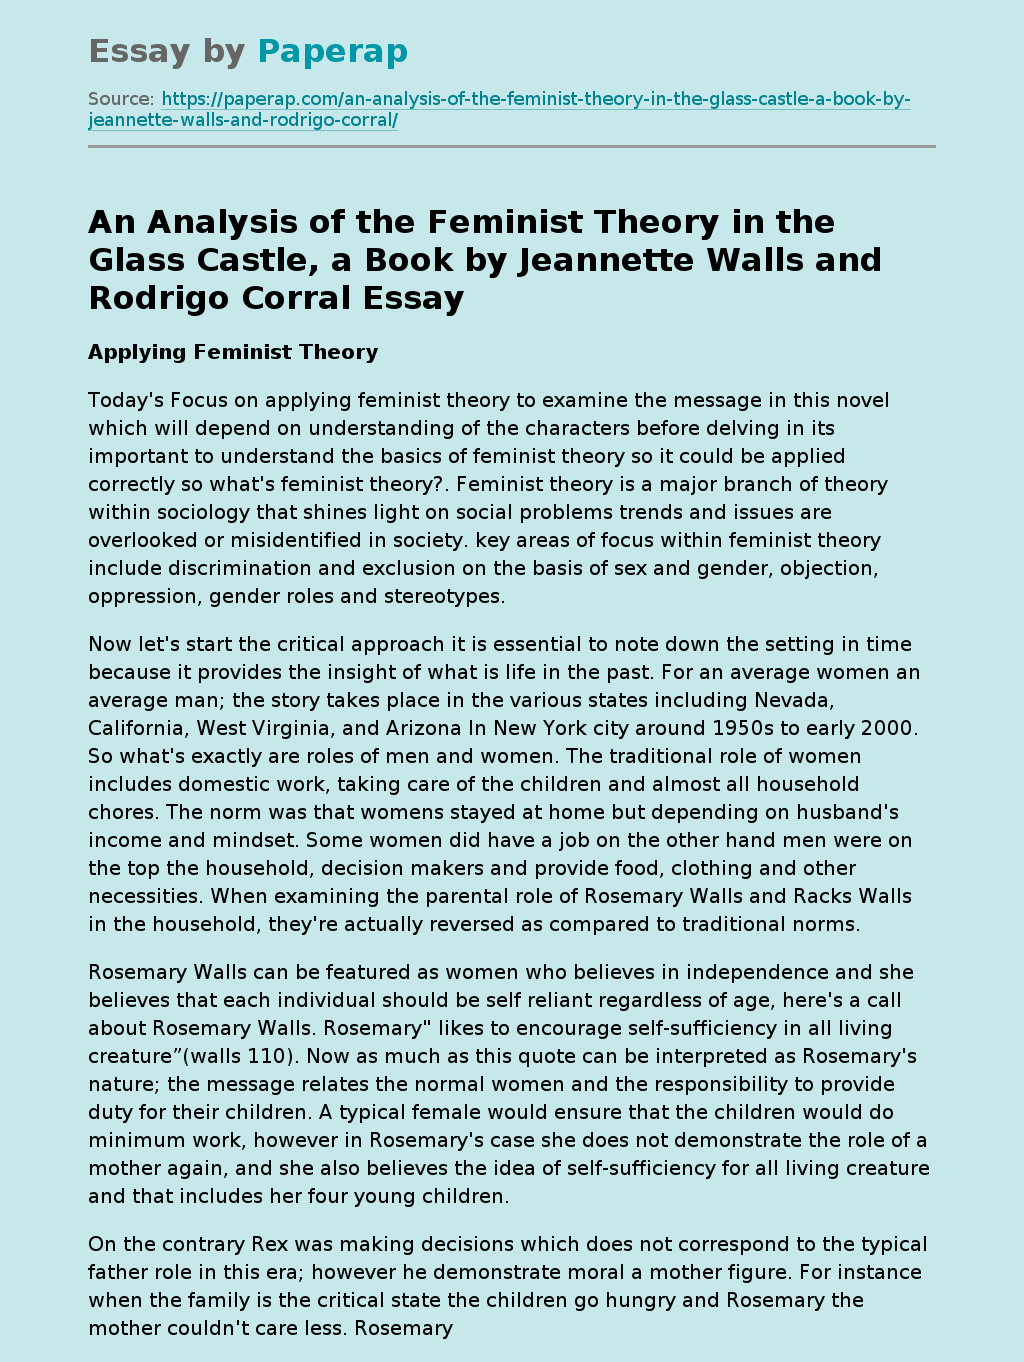 An Analysis of the Feminist Theory in the Glass Castle, a Book by Jeannette Walls and Rodrigo Corral